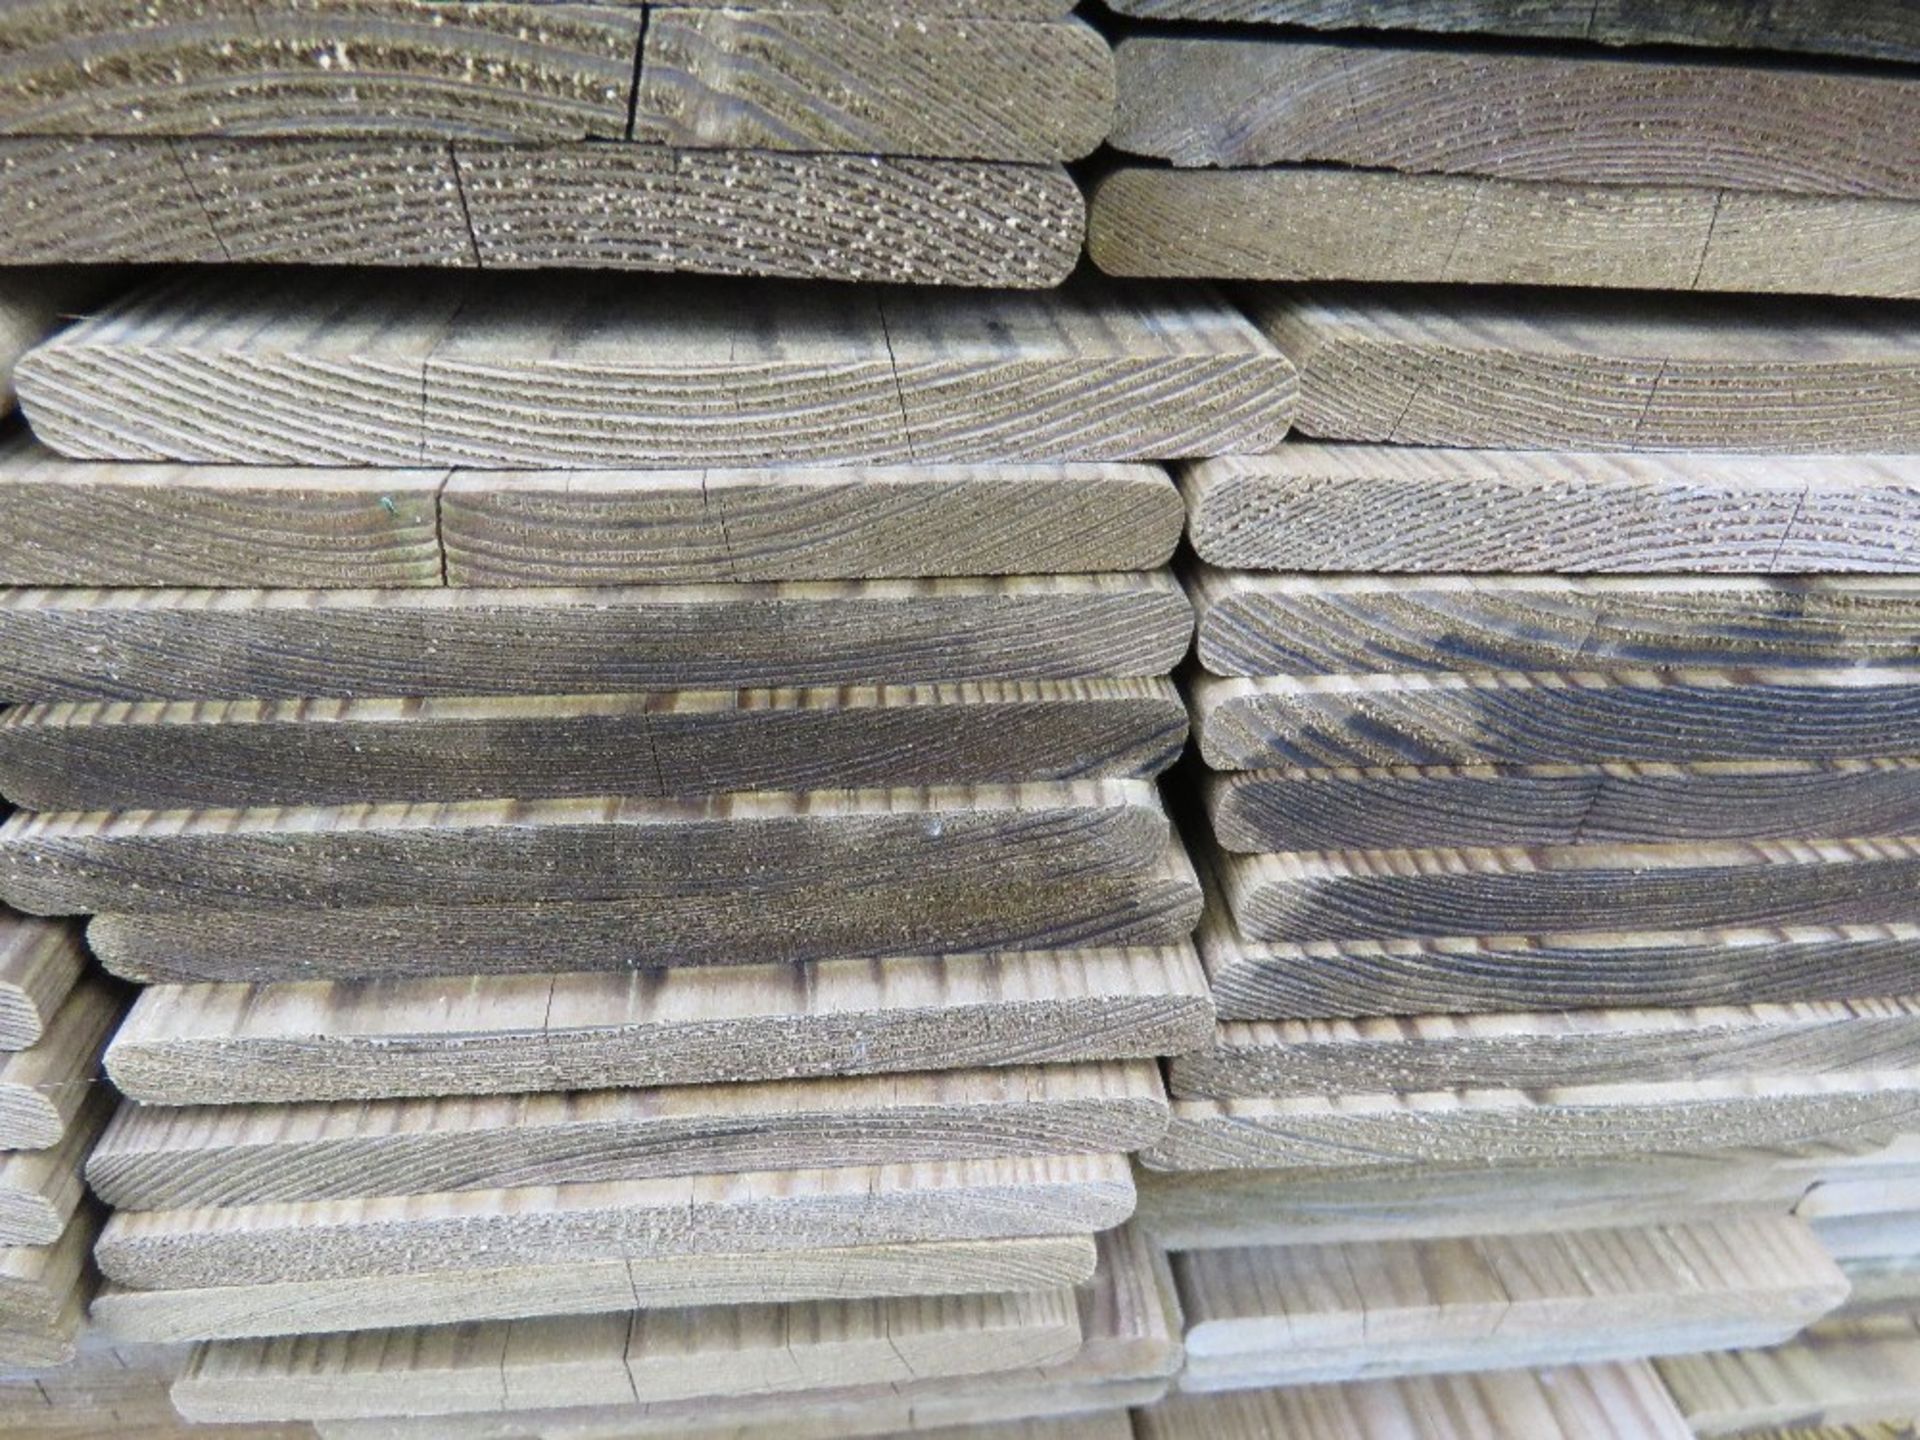 2 X PACKS OF PRESSURE TREATED HIT AND MISS FENCE CLADDING TIMBER BOARDS: 1.45M LENGTH X 100MM WIDTH - Image 3 of 3